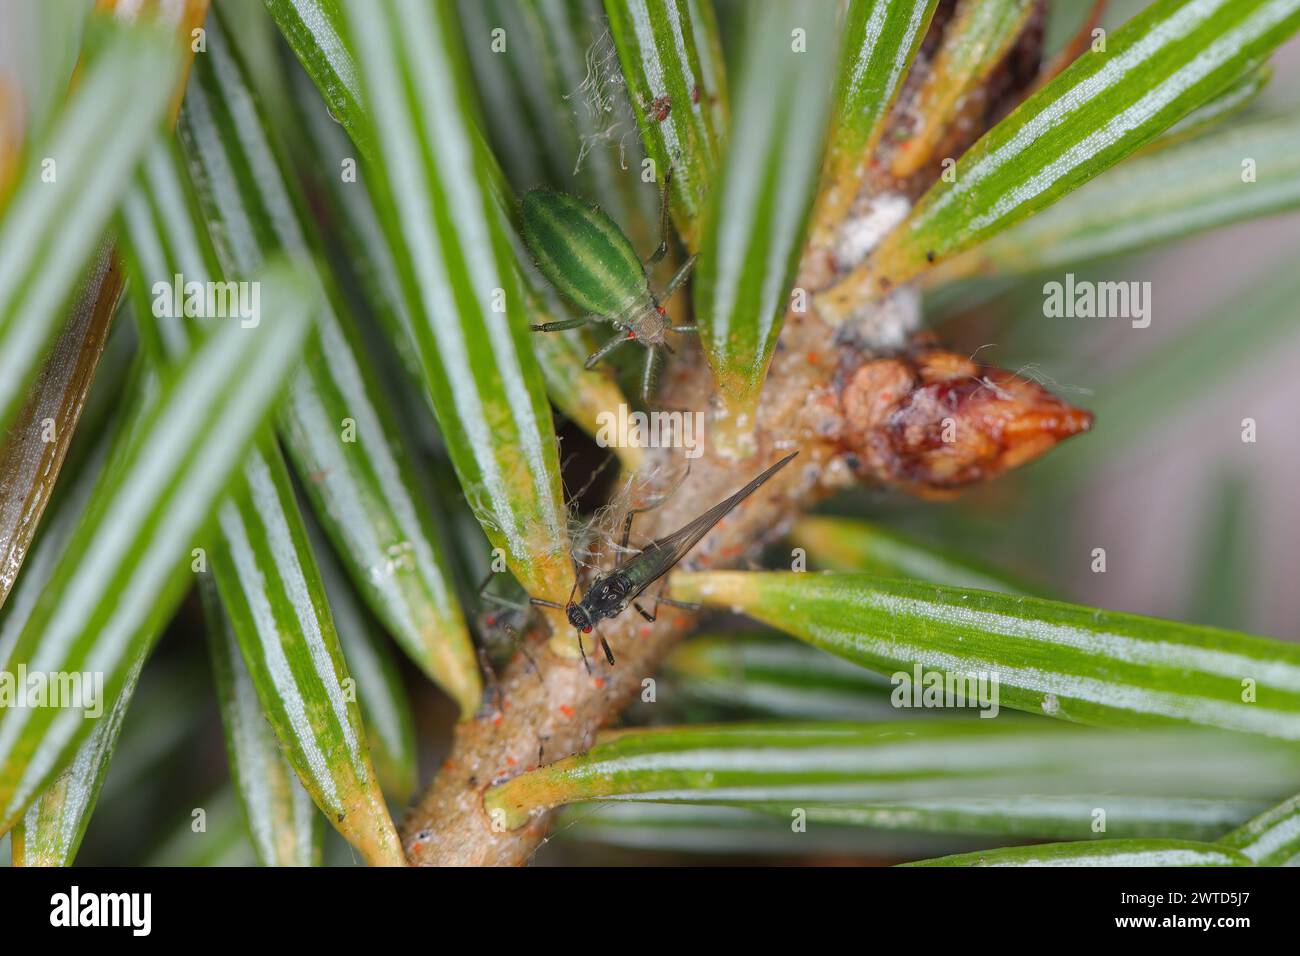 Green striped fir aphid (Cinara pectinatae) on fir (Abies alba) twig with needles. Winged and wingless individual. Stock Photo